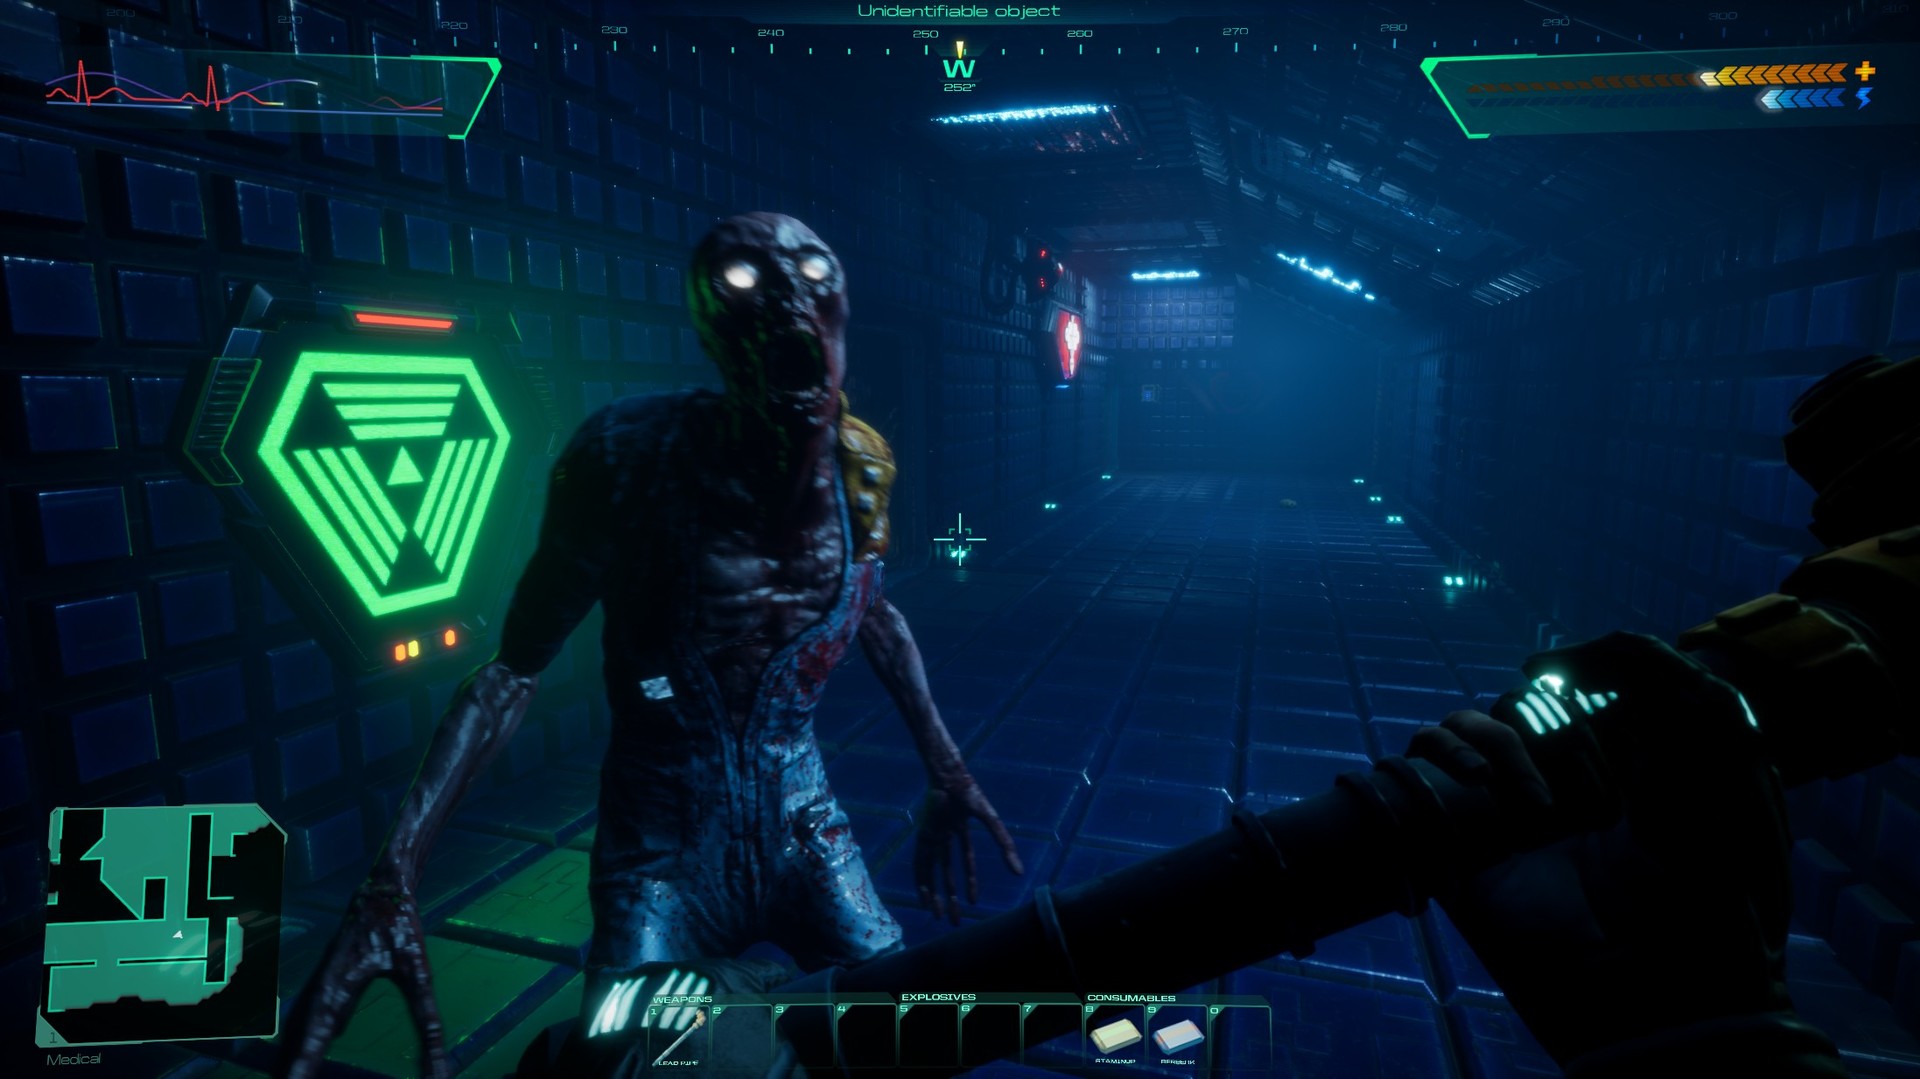 PC Classic System Shock 2 Enhanced Edition Gets VR Support - Gaming.net